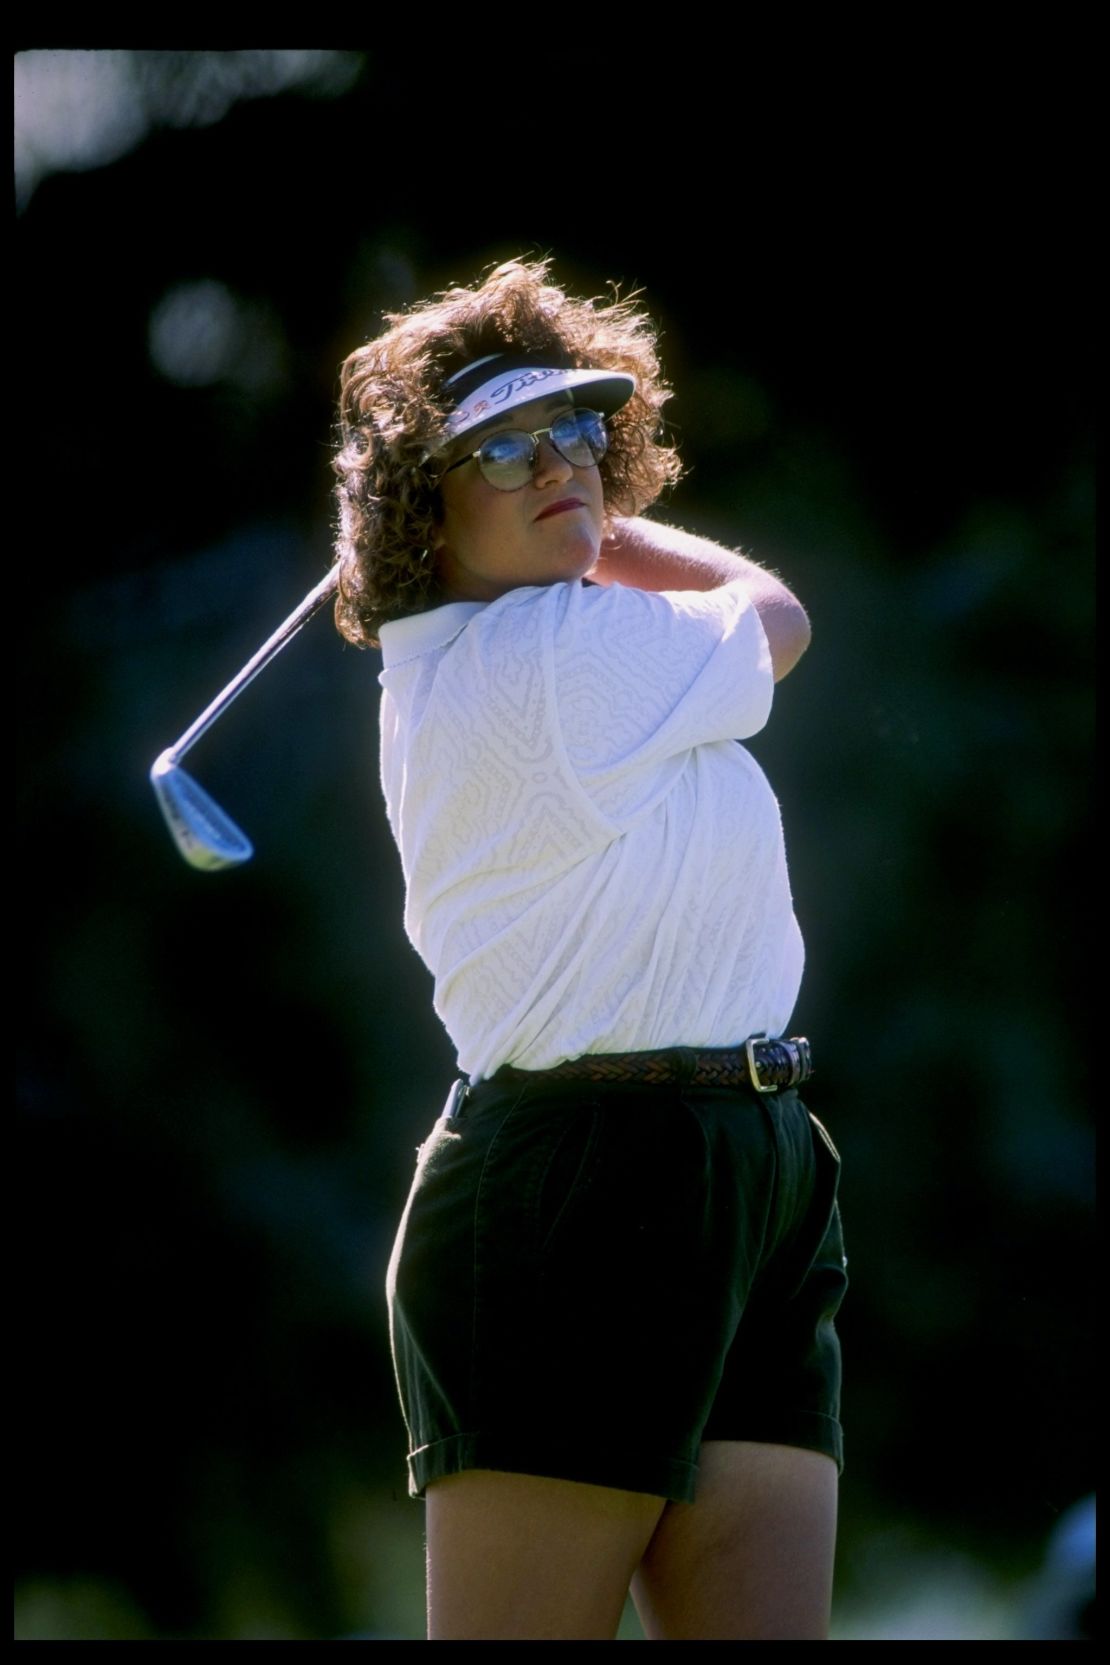 Kerr made the amateur 1996 U.S. Curtis Cup team and turned pro later that year, aged 18.